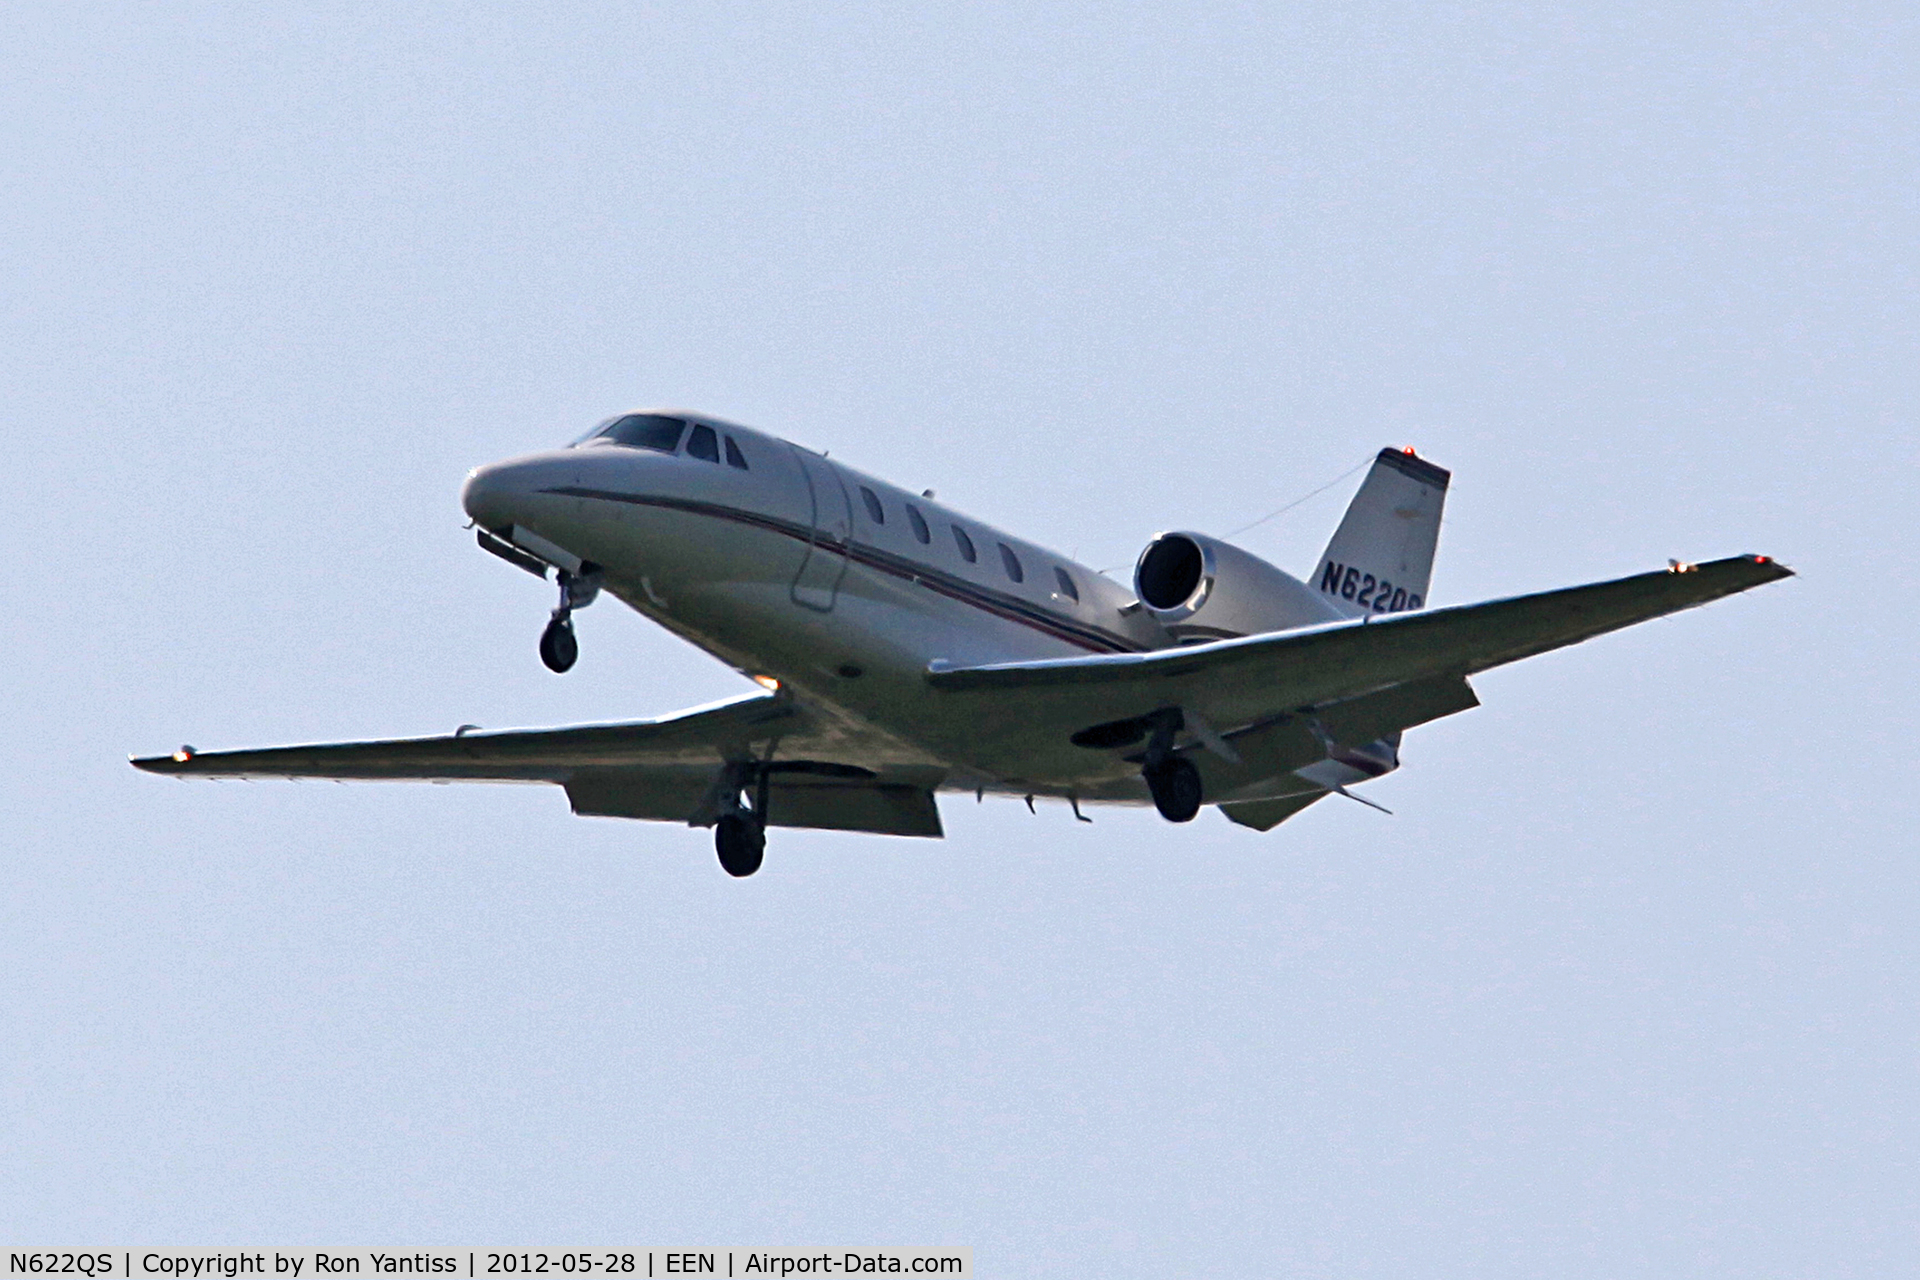 N622QS, 2002 Cessna 560XL Citation Excel C/N 560-5286, Straight-in final for runway 02, Dillant-Hopkins Airport, Keene, NH